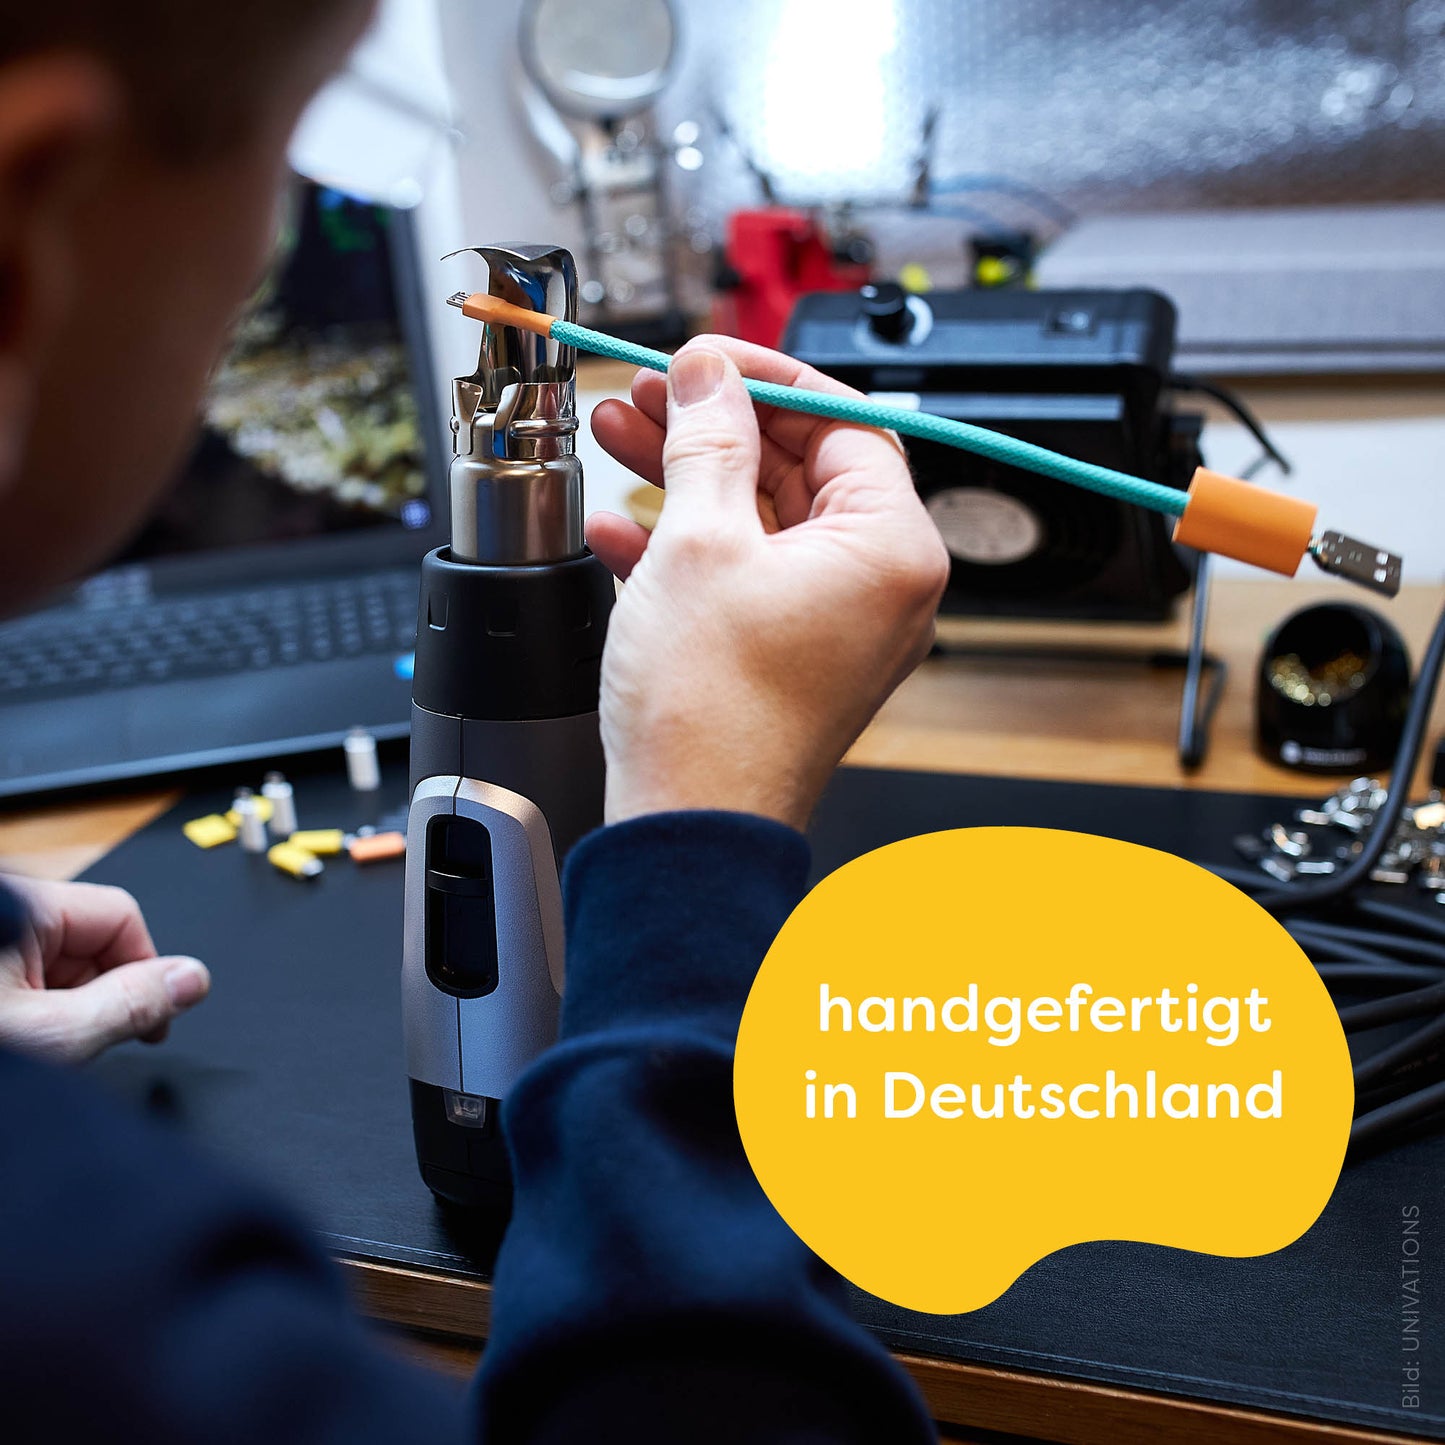 recables fair USB charging cable is made-in-Germany. Illustration: Cable maker René attaches a heat shrink tube by hand with the help of a hot air blower.